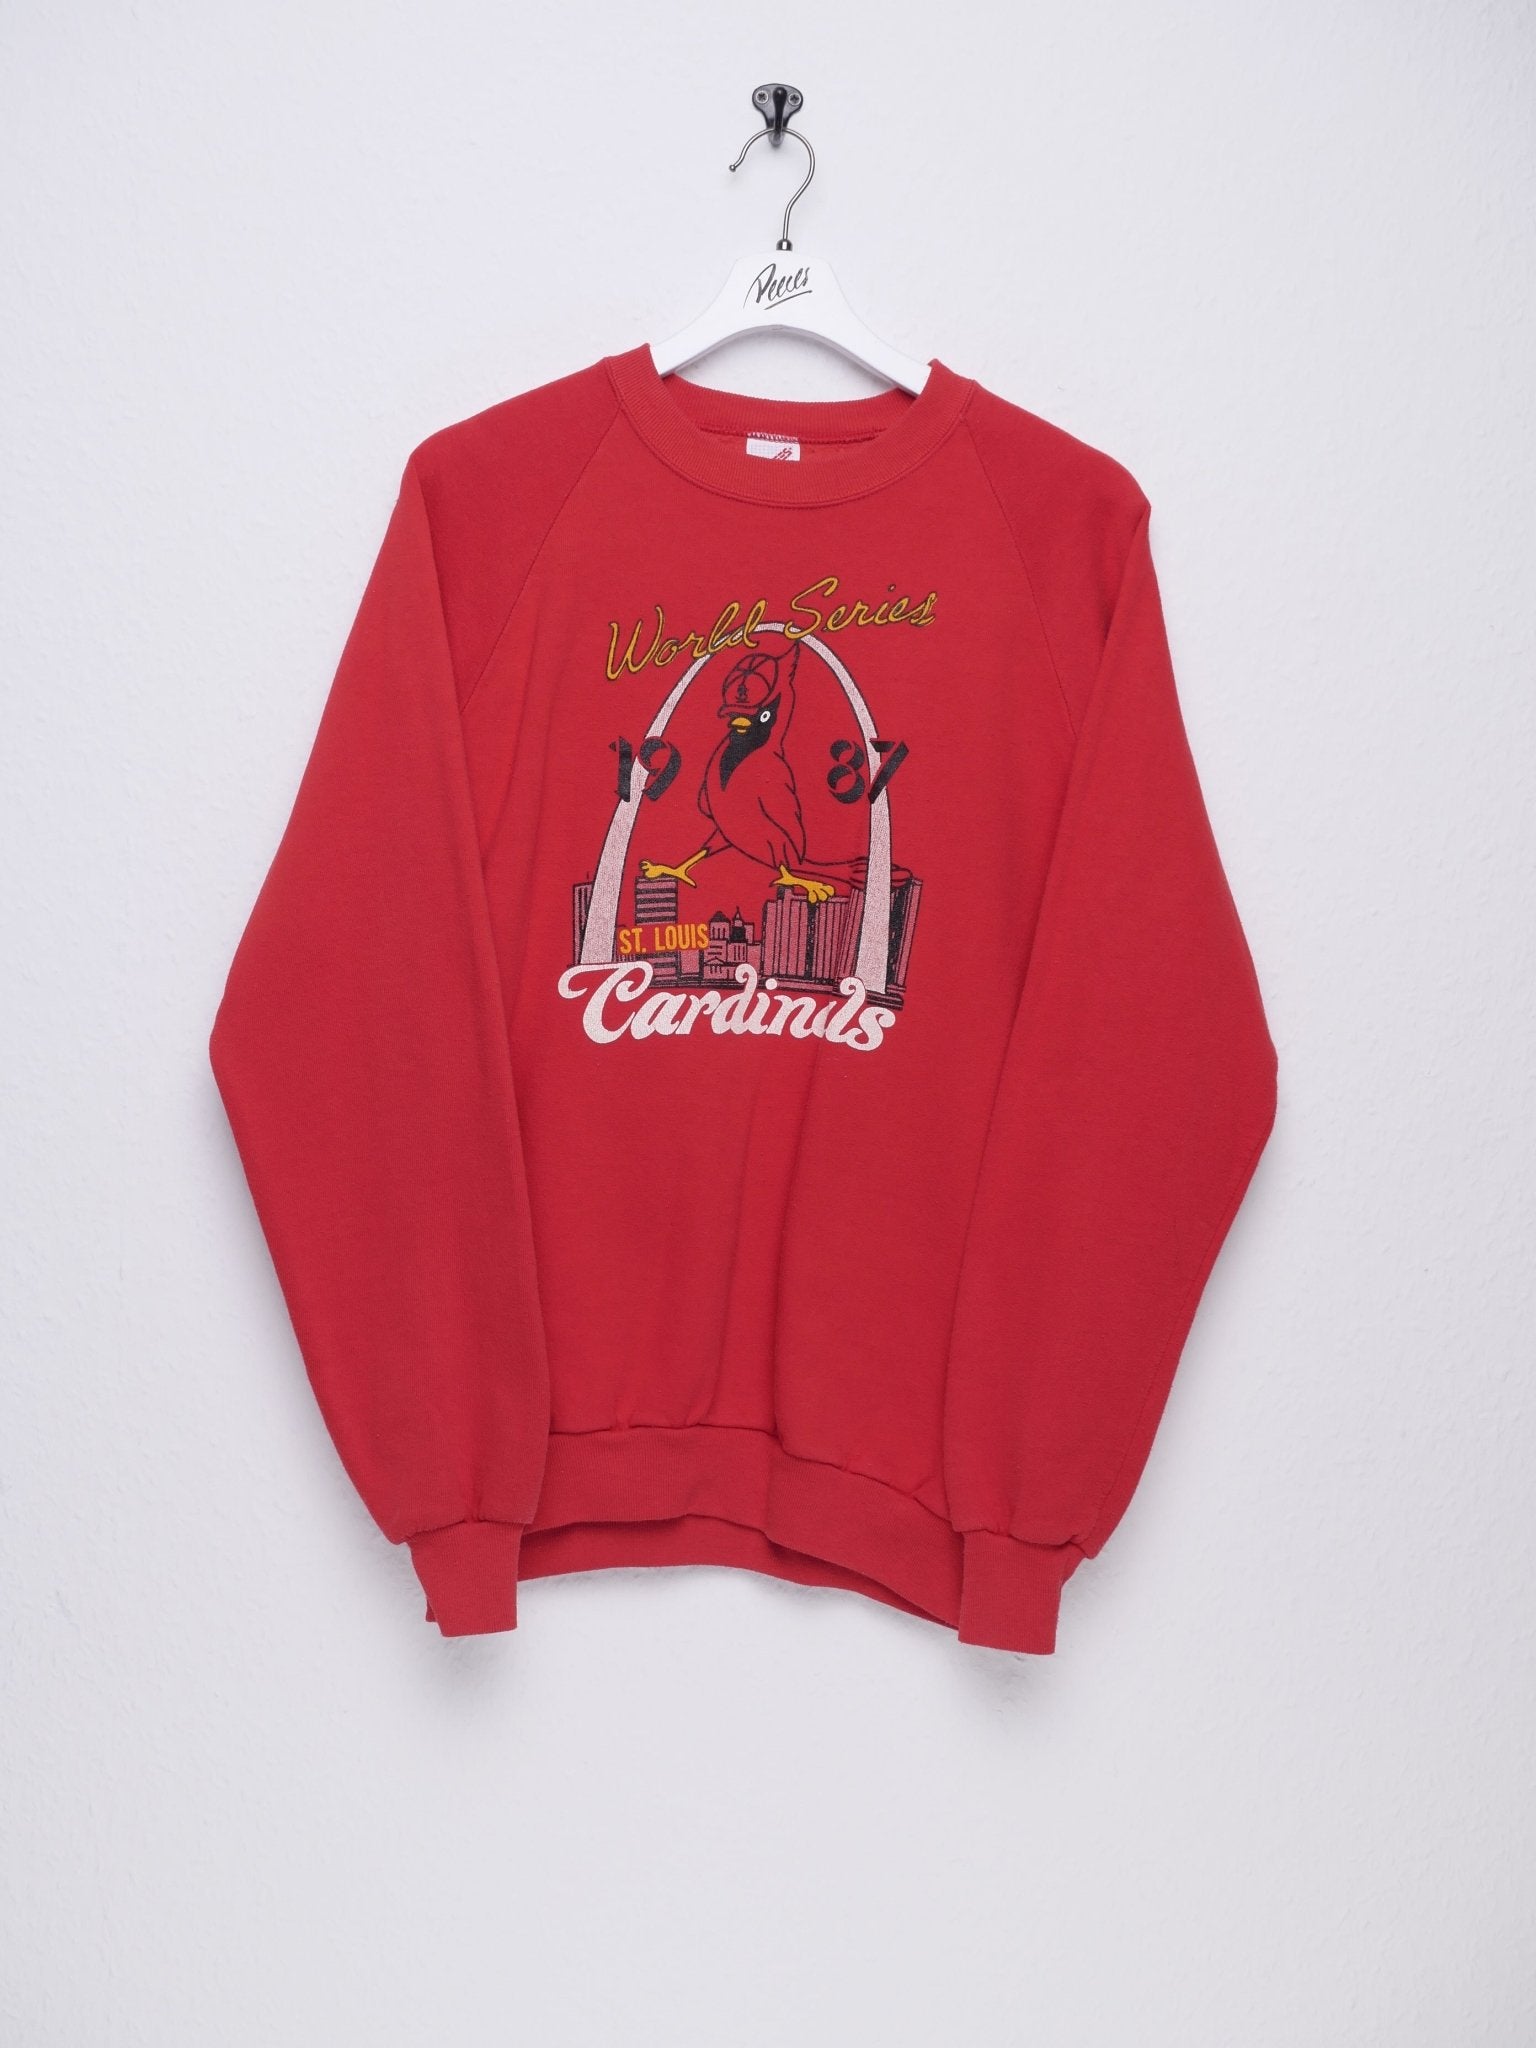 jerzees Cardinals printed Spellout Vintage Sweater - Peeces